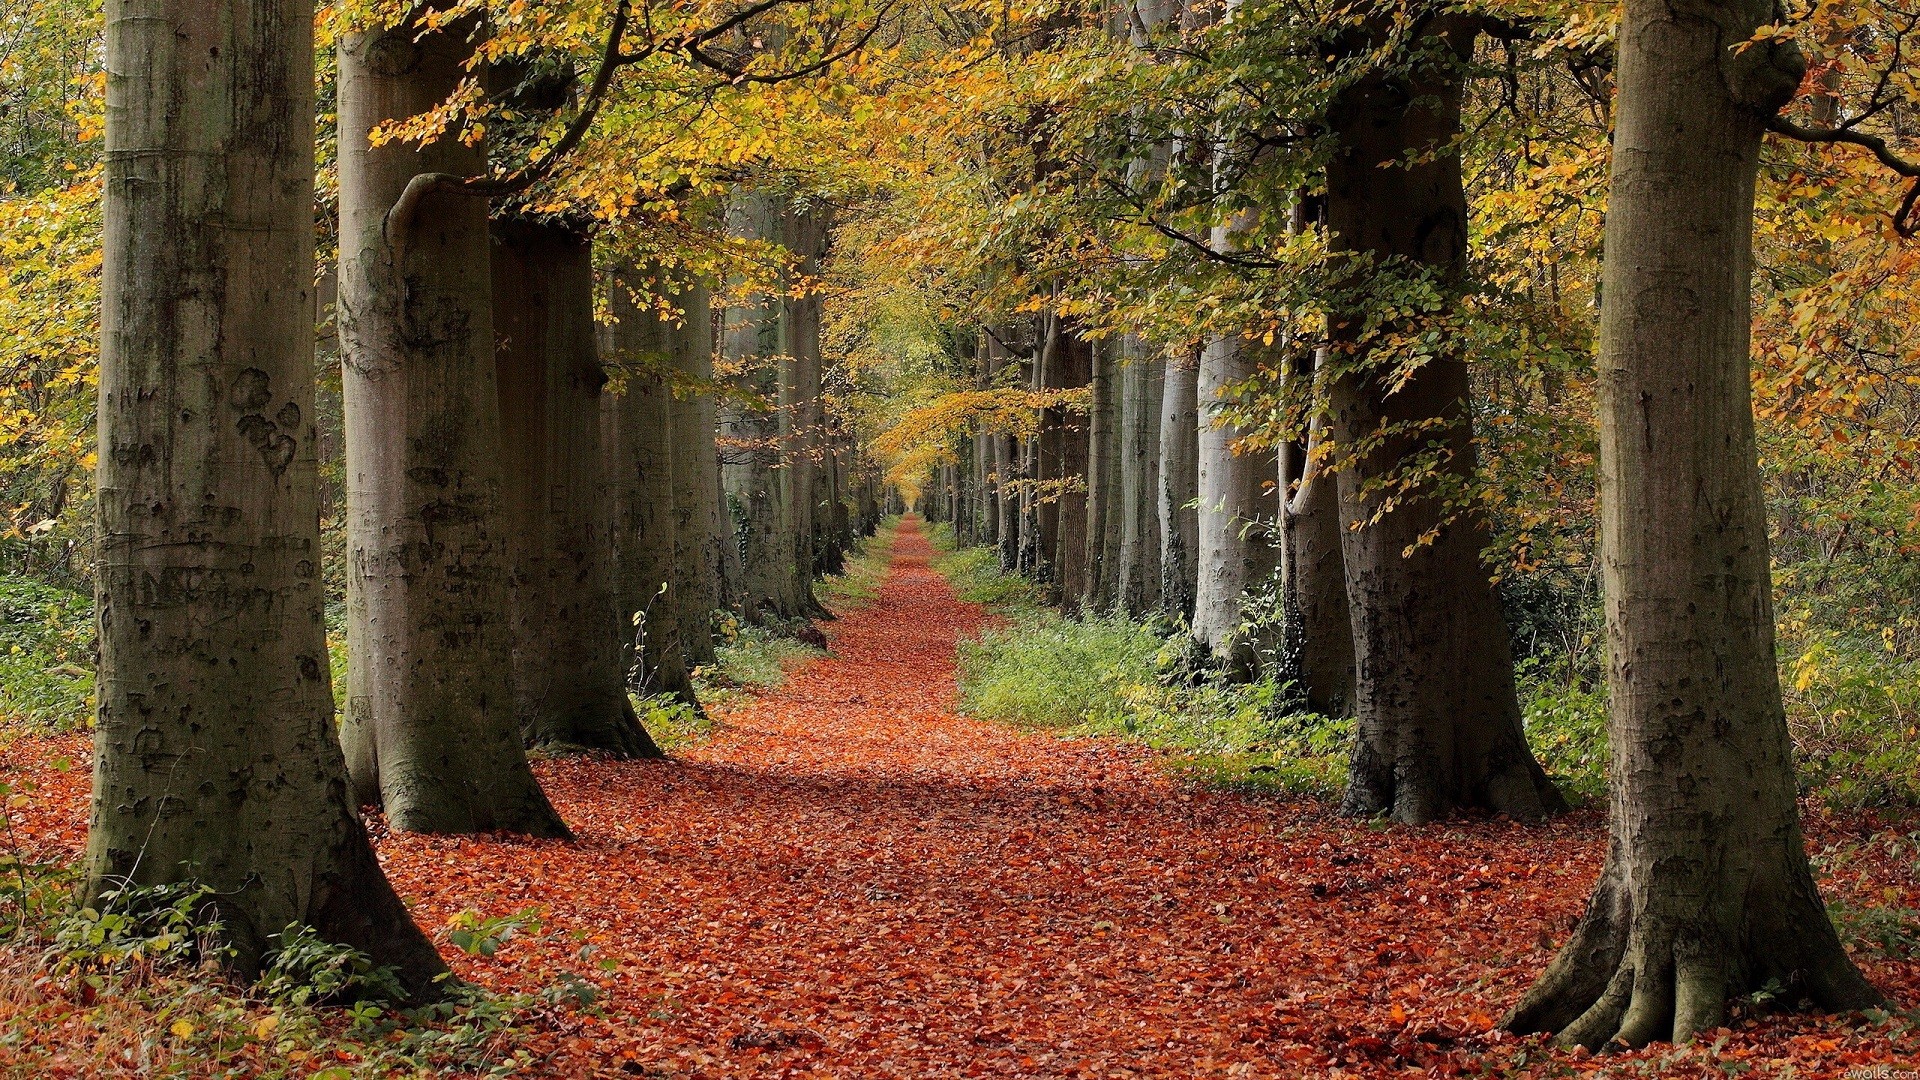 General 1920x1080 nature fall trees leaves forest path outdoors